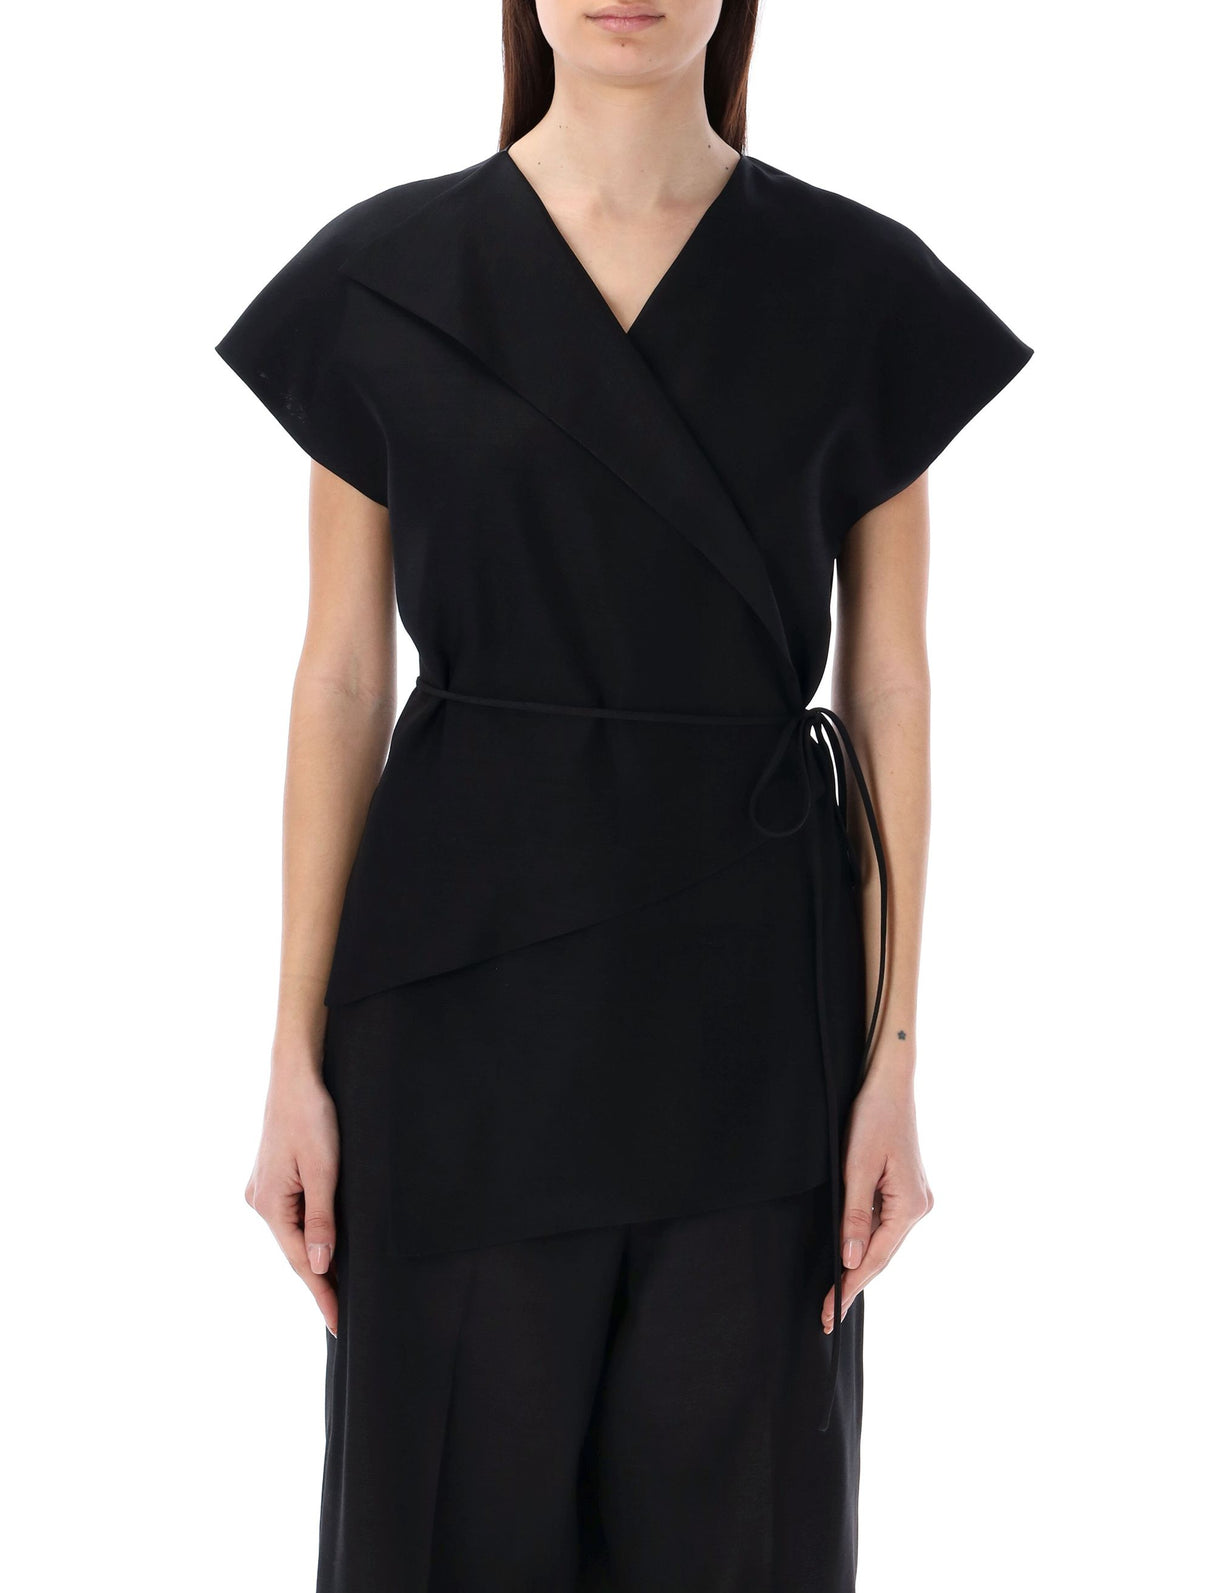 FABIANA FILIPPI Asymmetric V-Neck Wool and Silk Top with Flap Motif and Matching Tie in Black